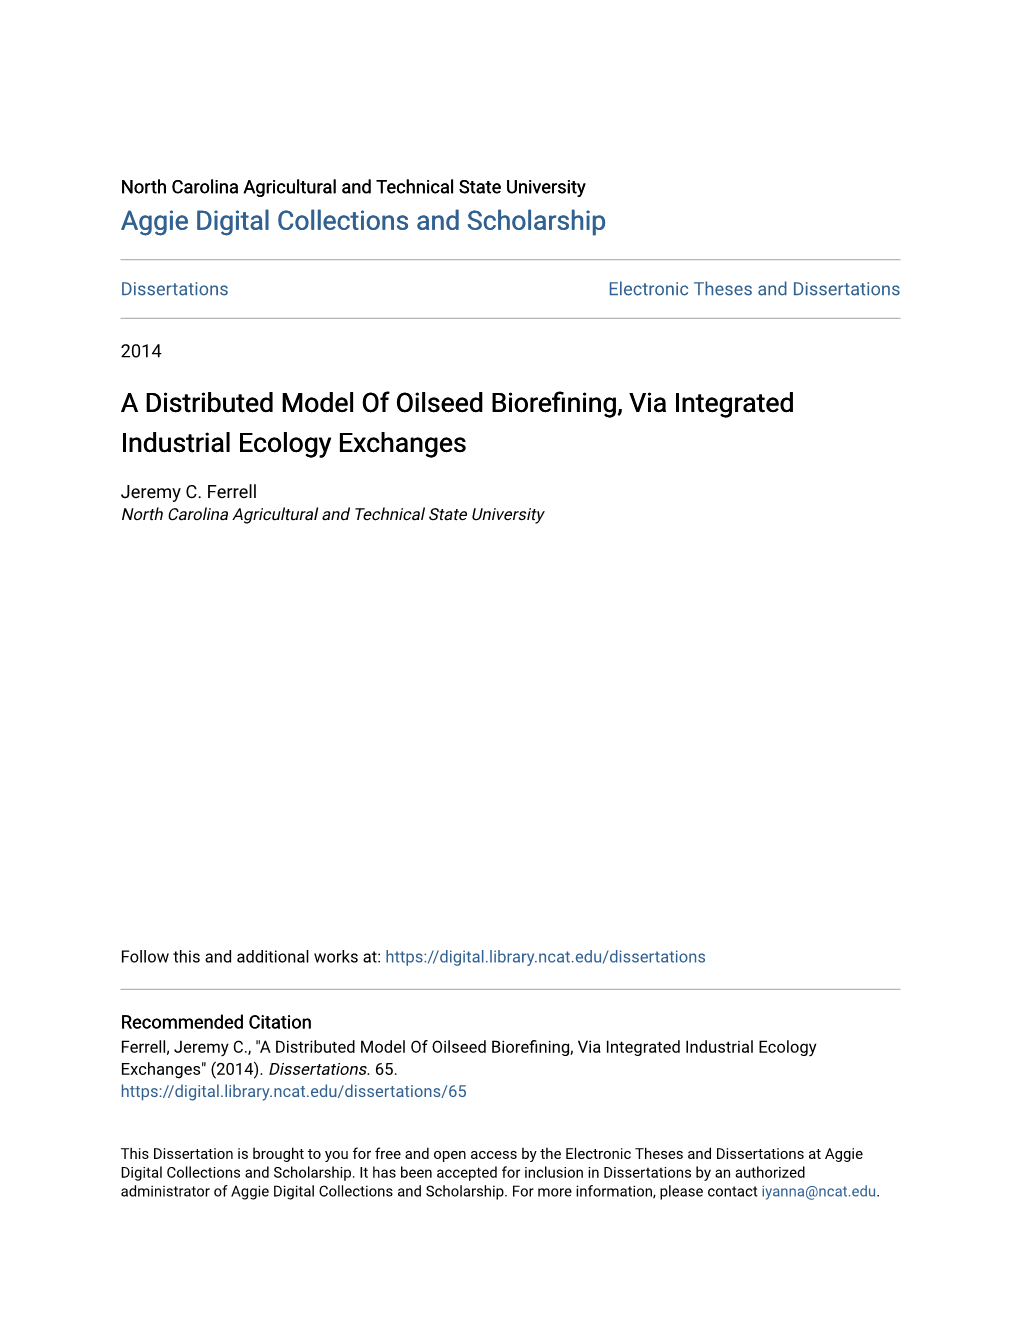 A Distributed Model of Oilseed Biorefining, Via Integrated Industrial Ecology Exchanges